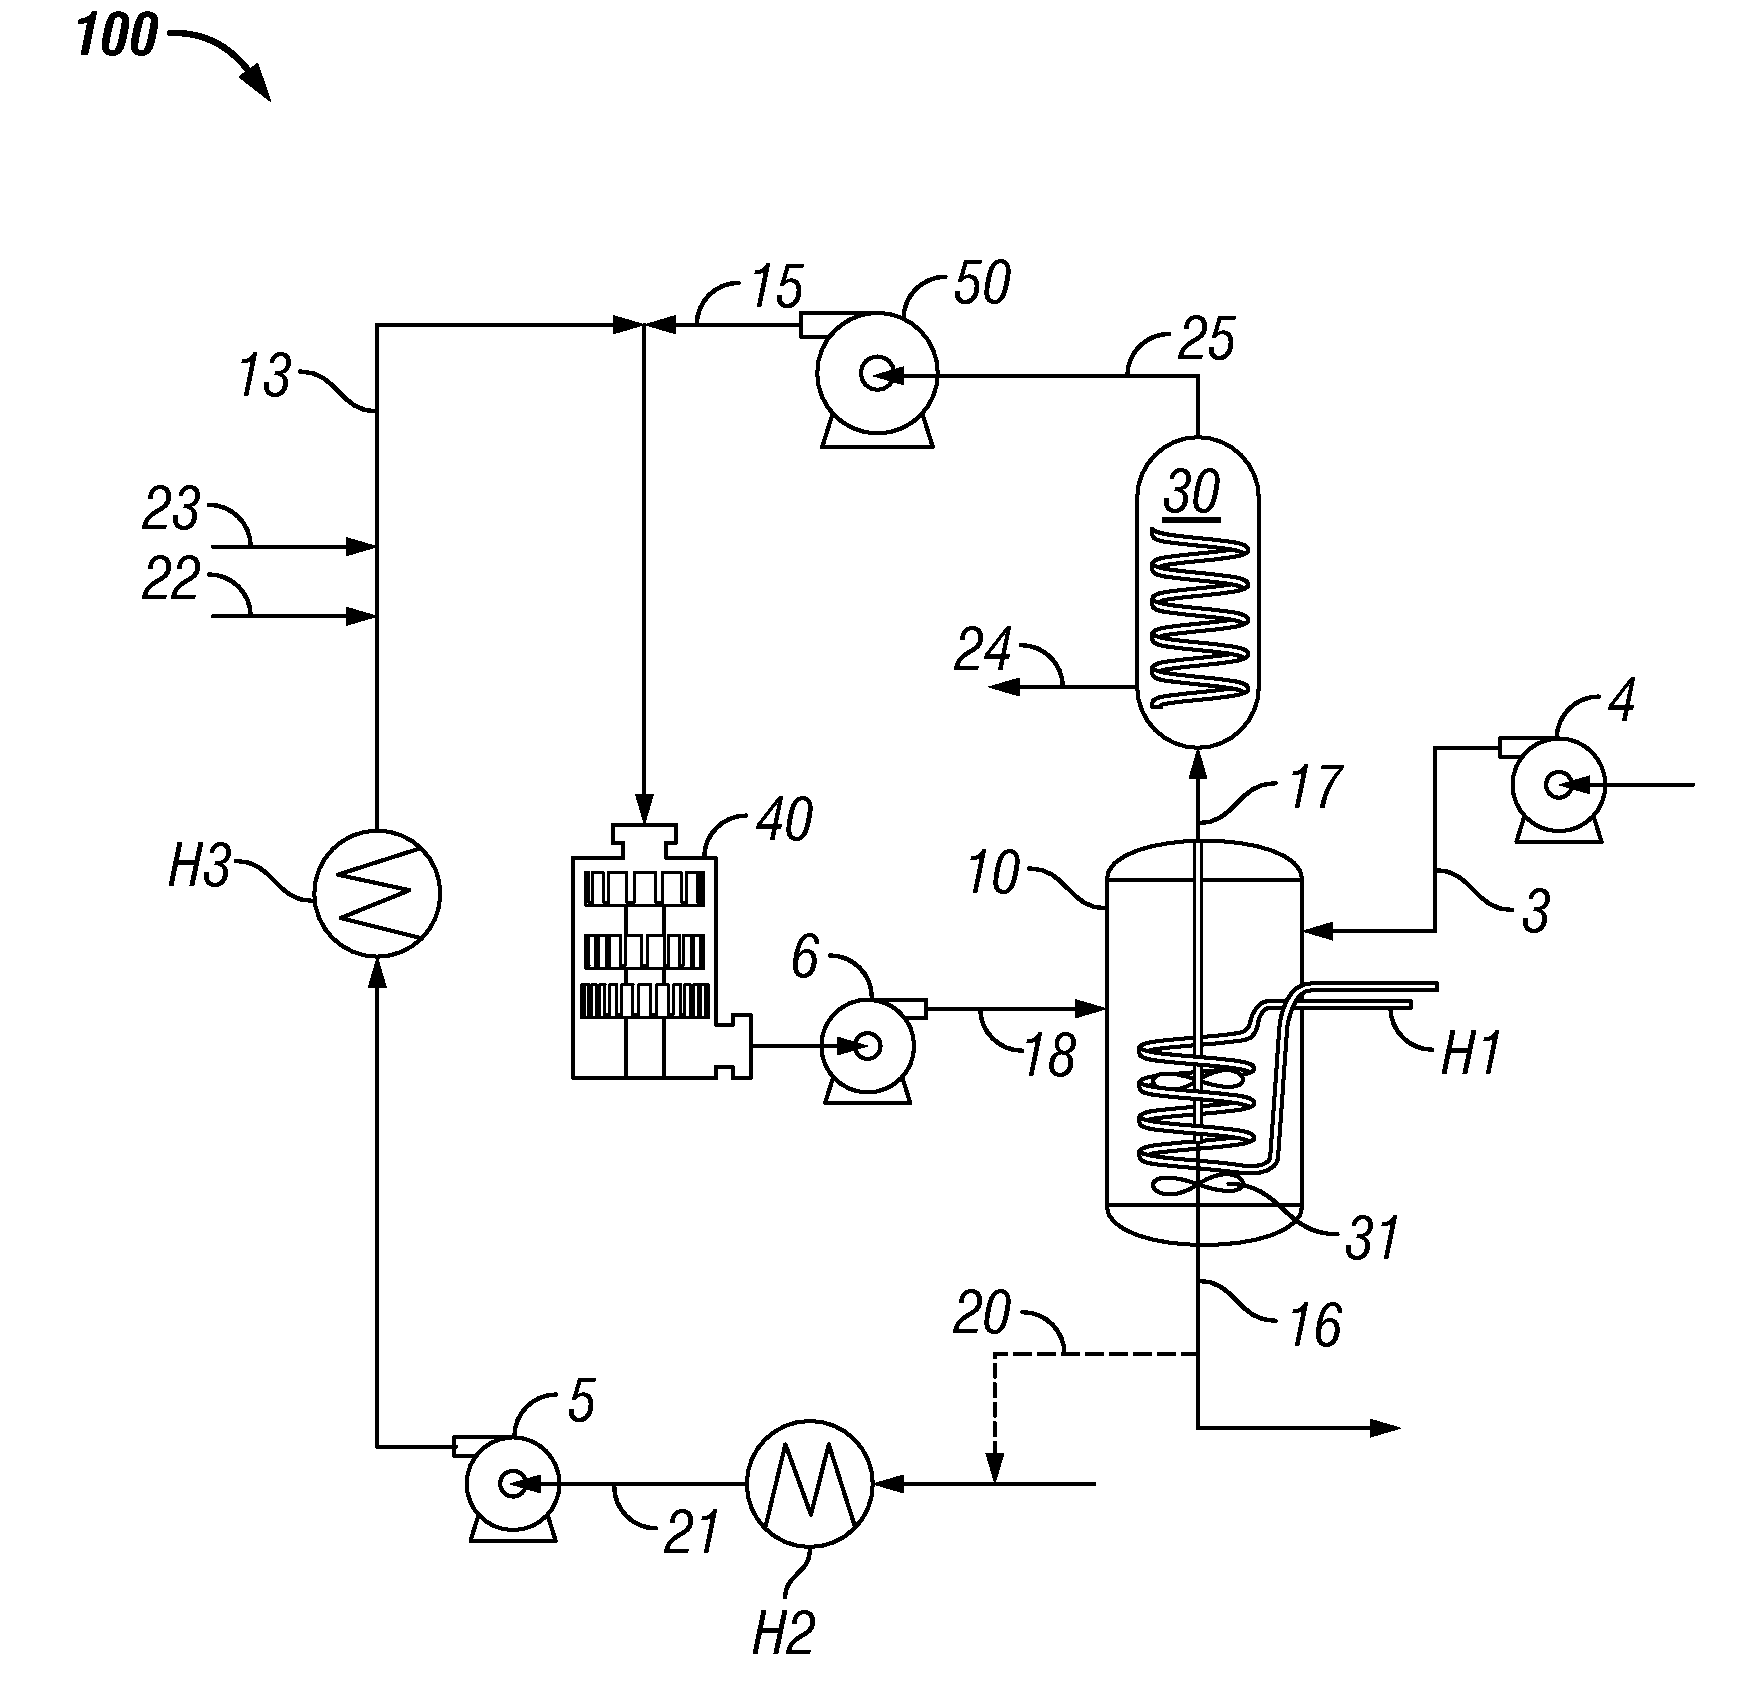 System and process for production of liquid product from light gas